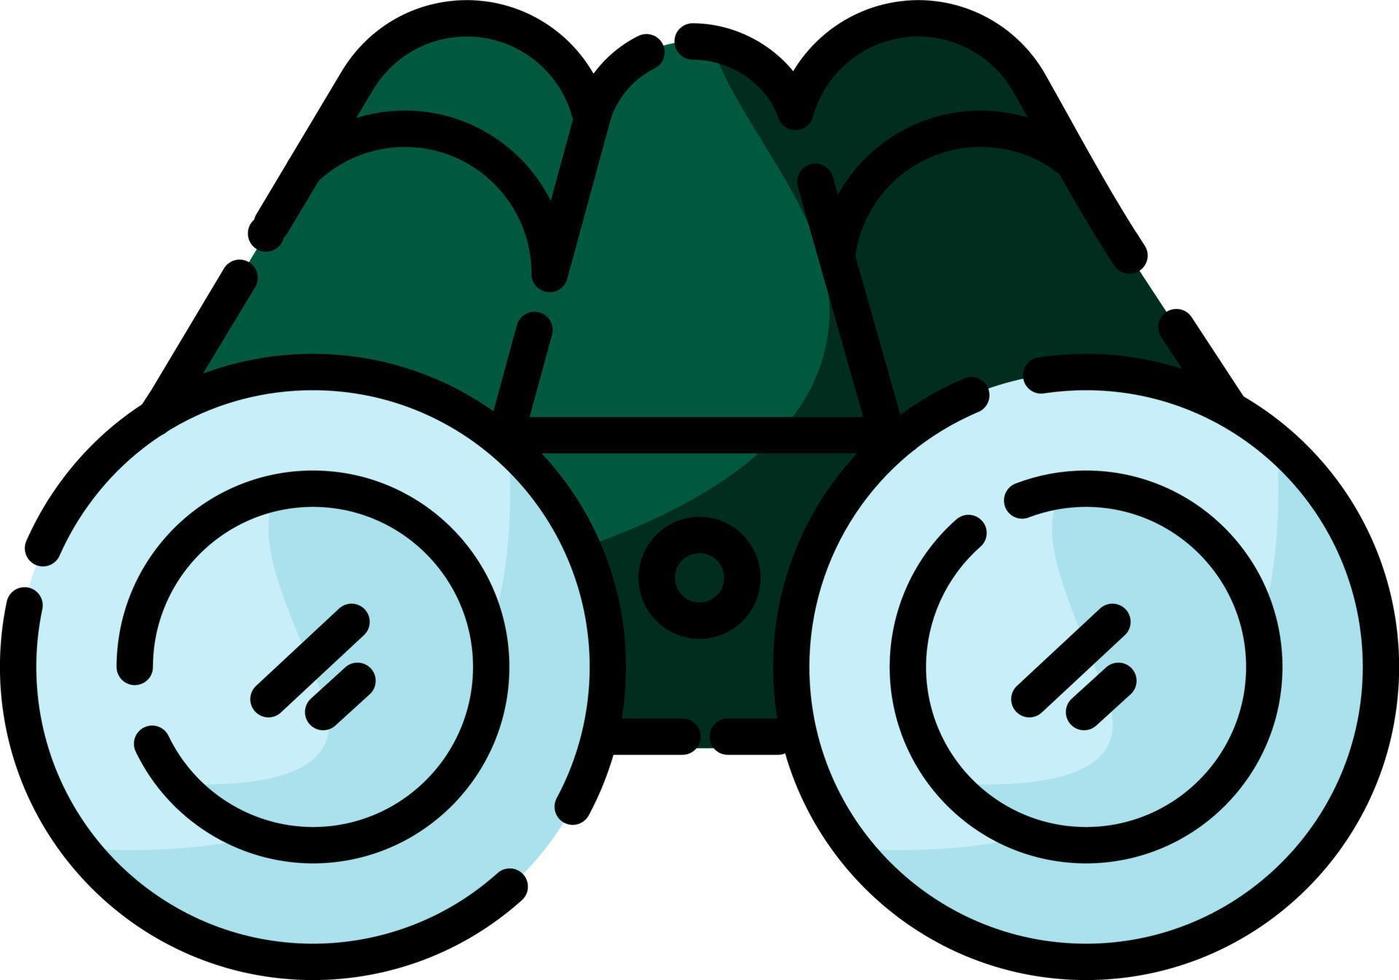 Camping binoculars , illustration, vector on a white background.